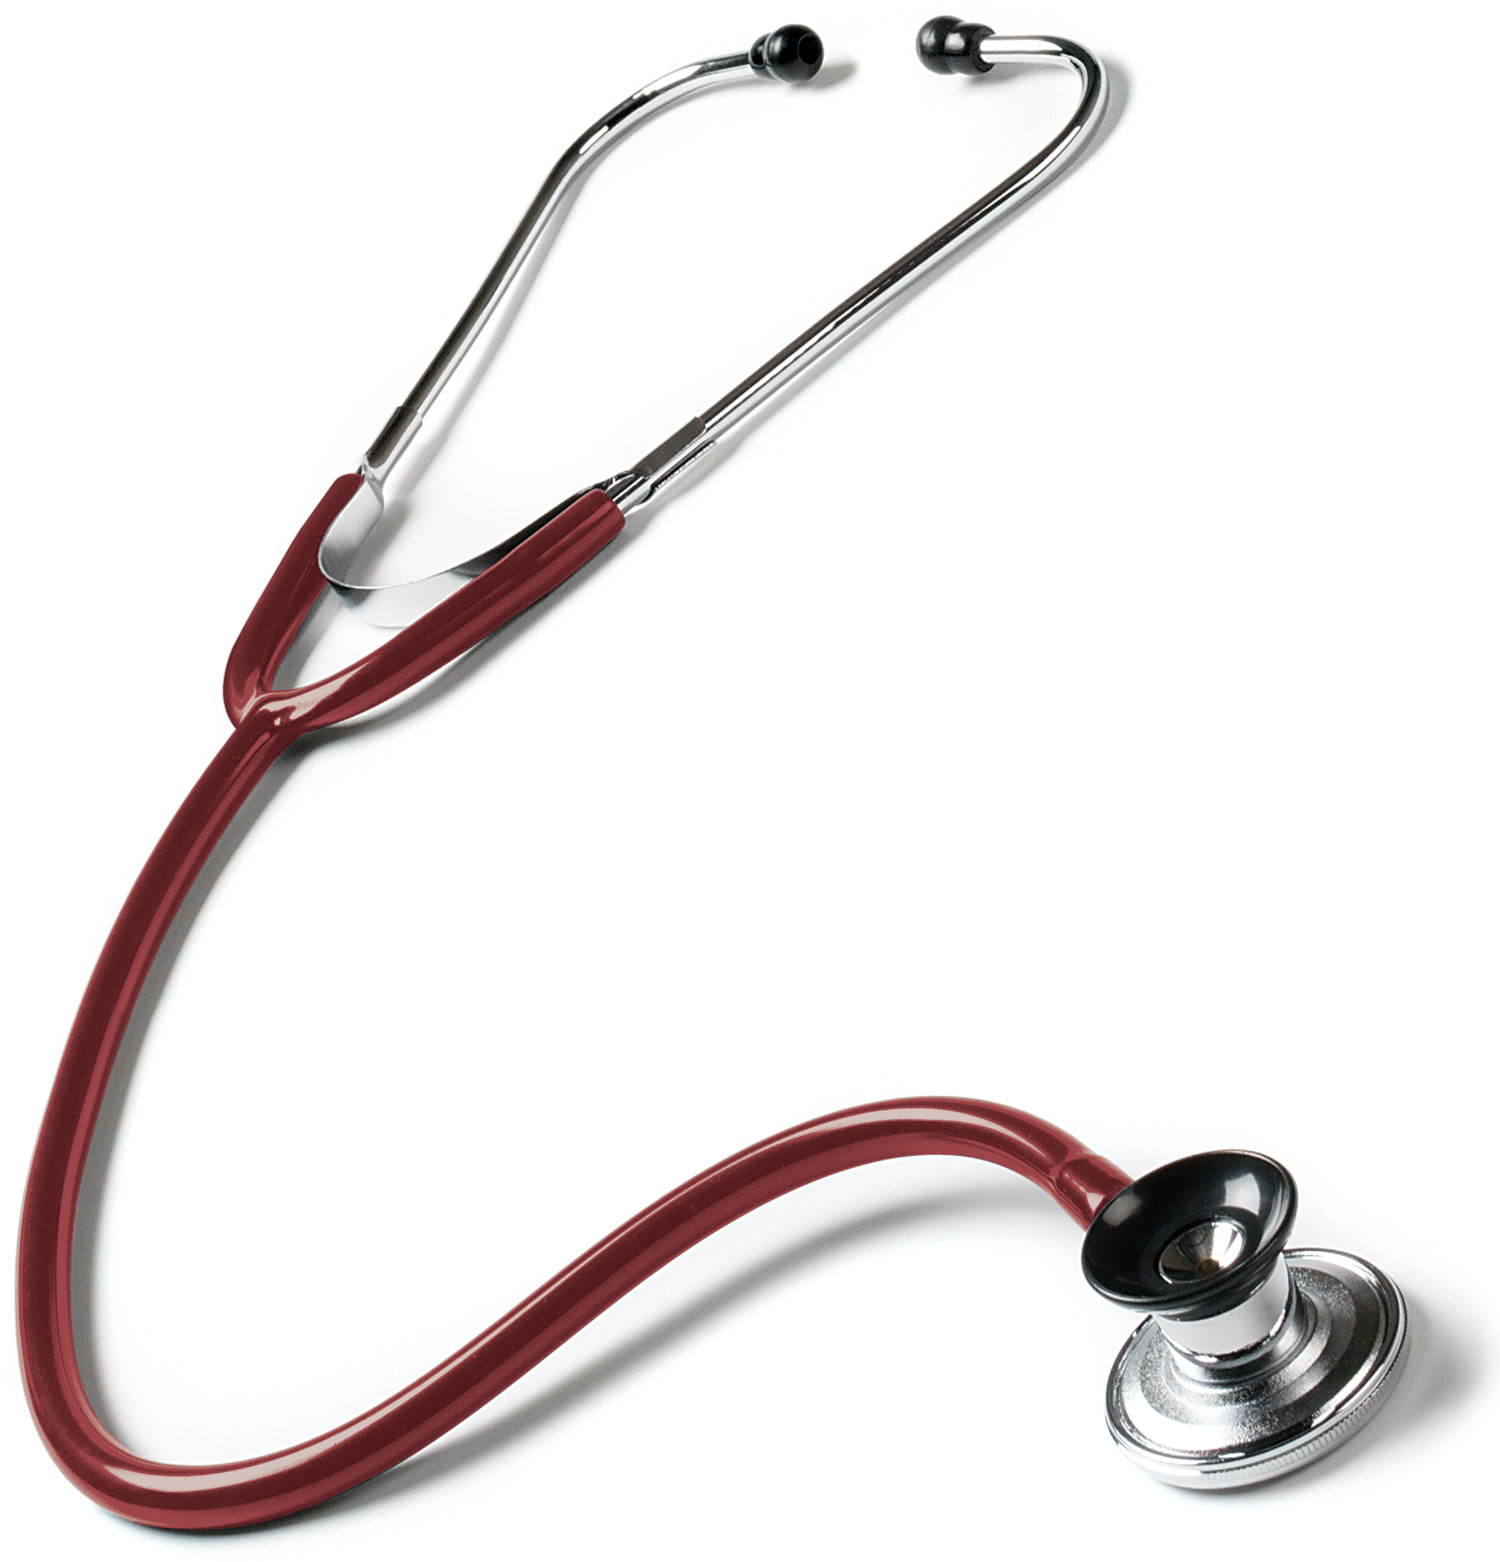 Stethoscope Png - ClipArt Best